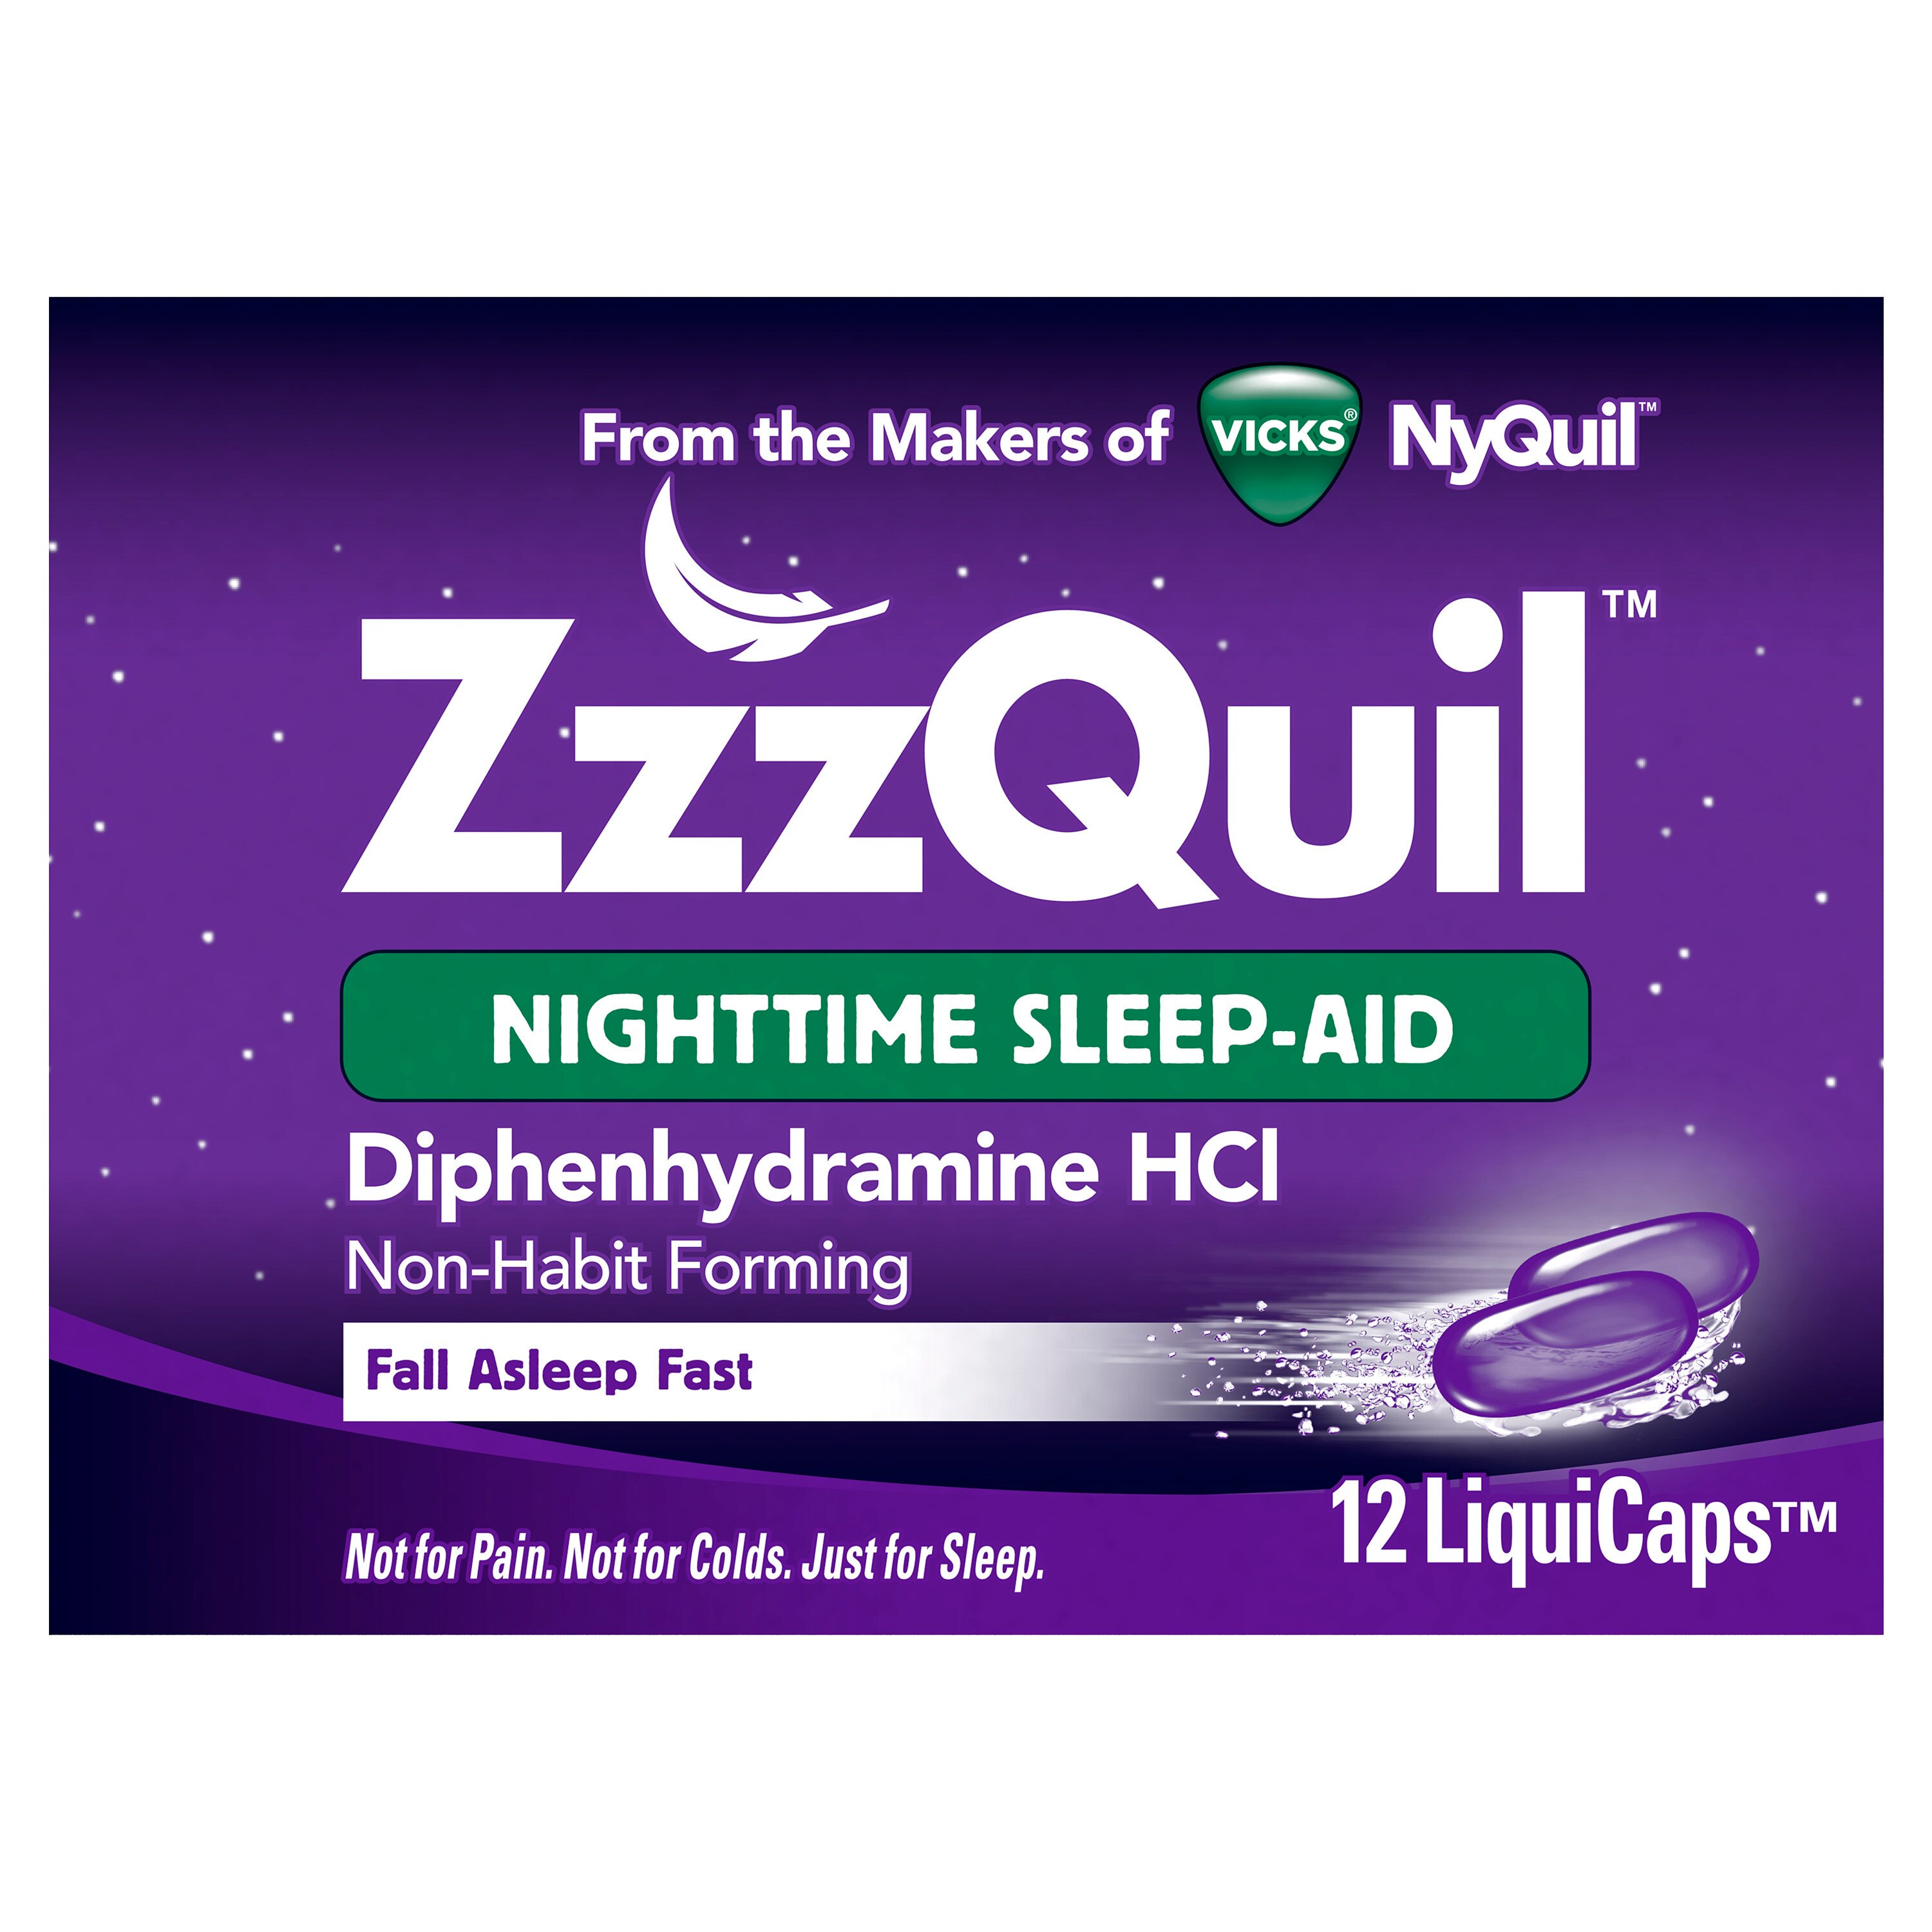 Vicks ZzzQuil Nighttime Sleep Aid, Non-Habit Forming, Fall Asleep Fast and Wake Refreshed, LiquiCaps